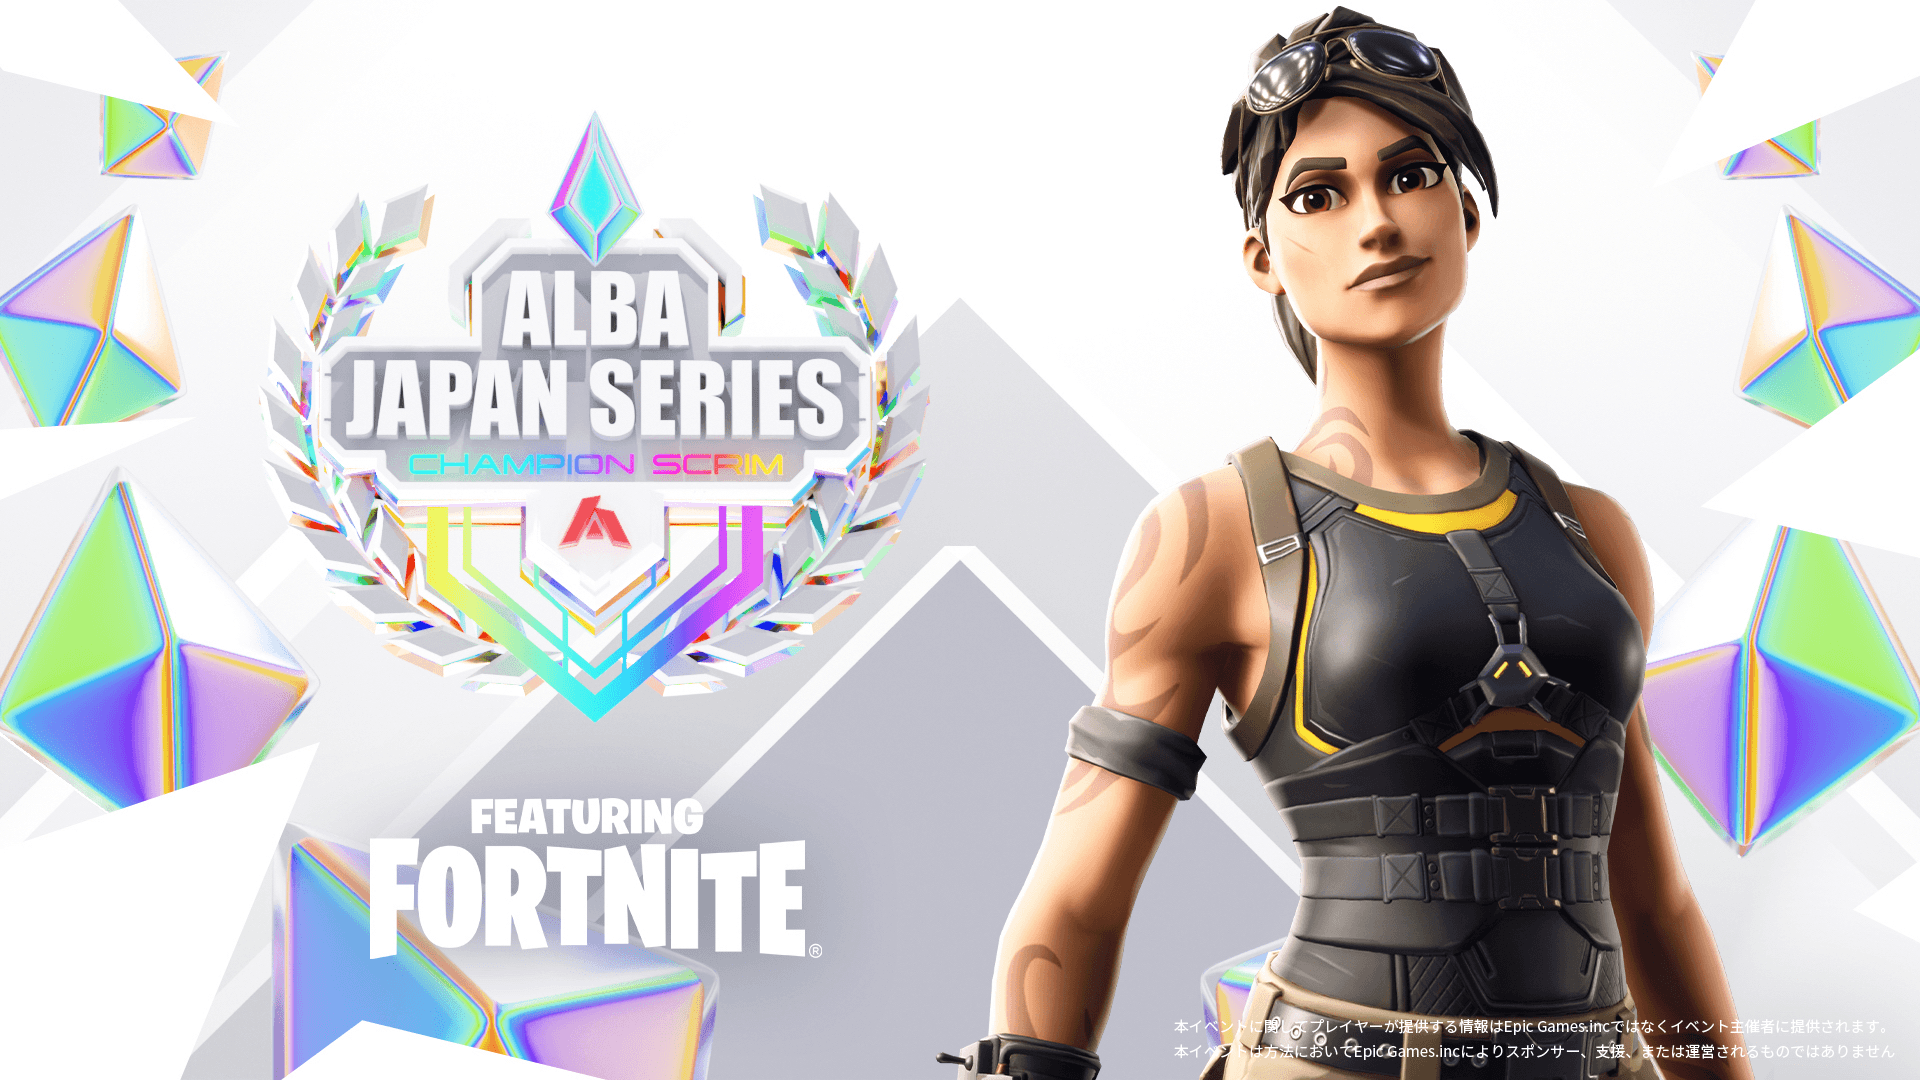 ALBA JAPAN SERIES featuring Fortnite #4 feature image